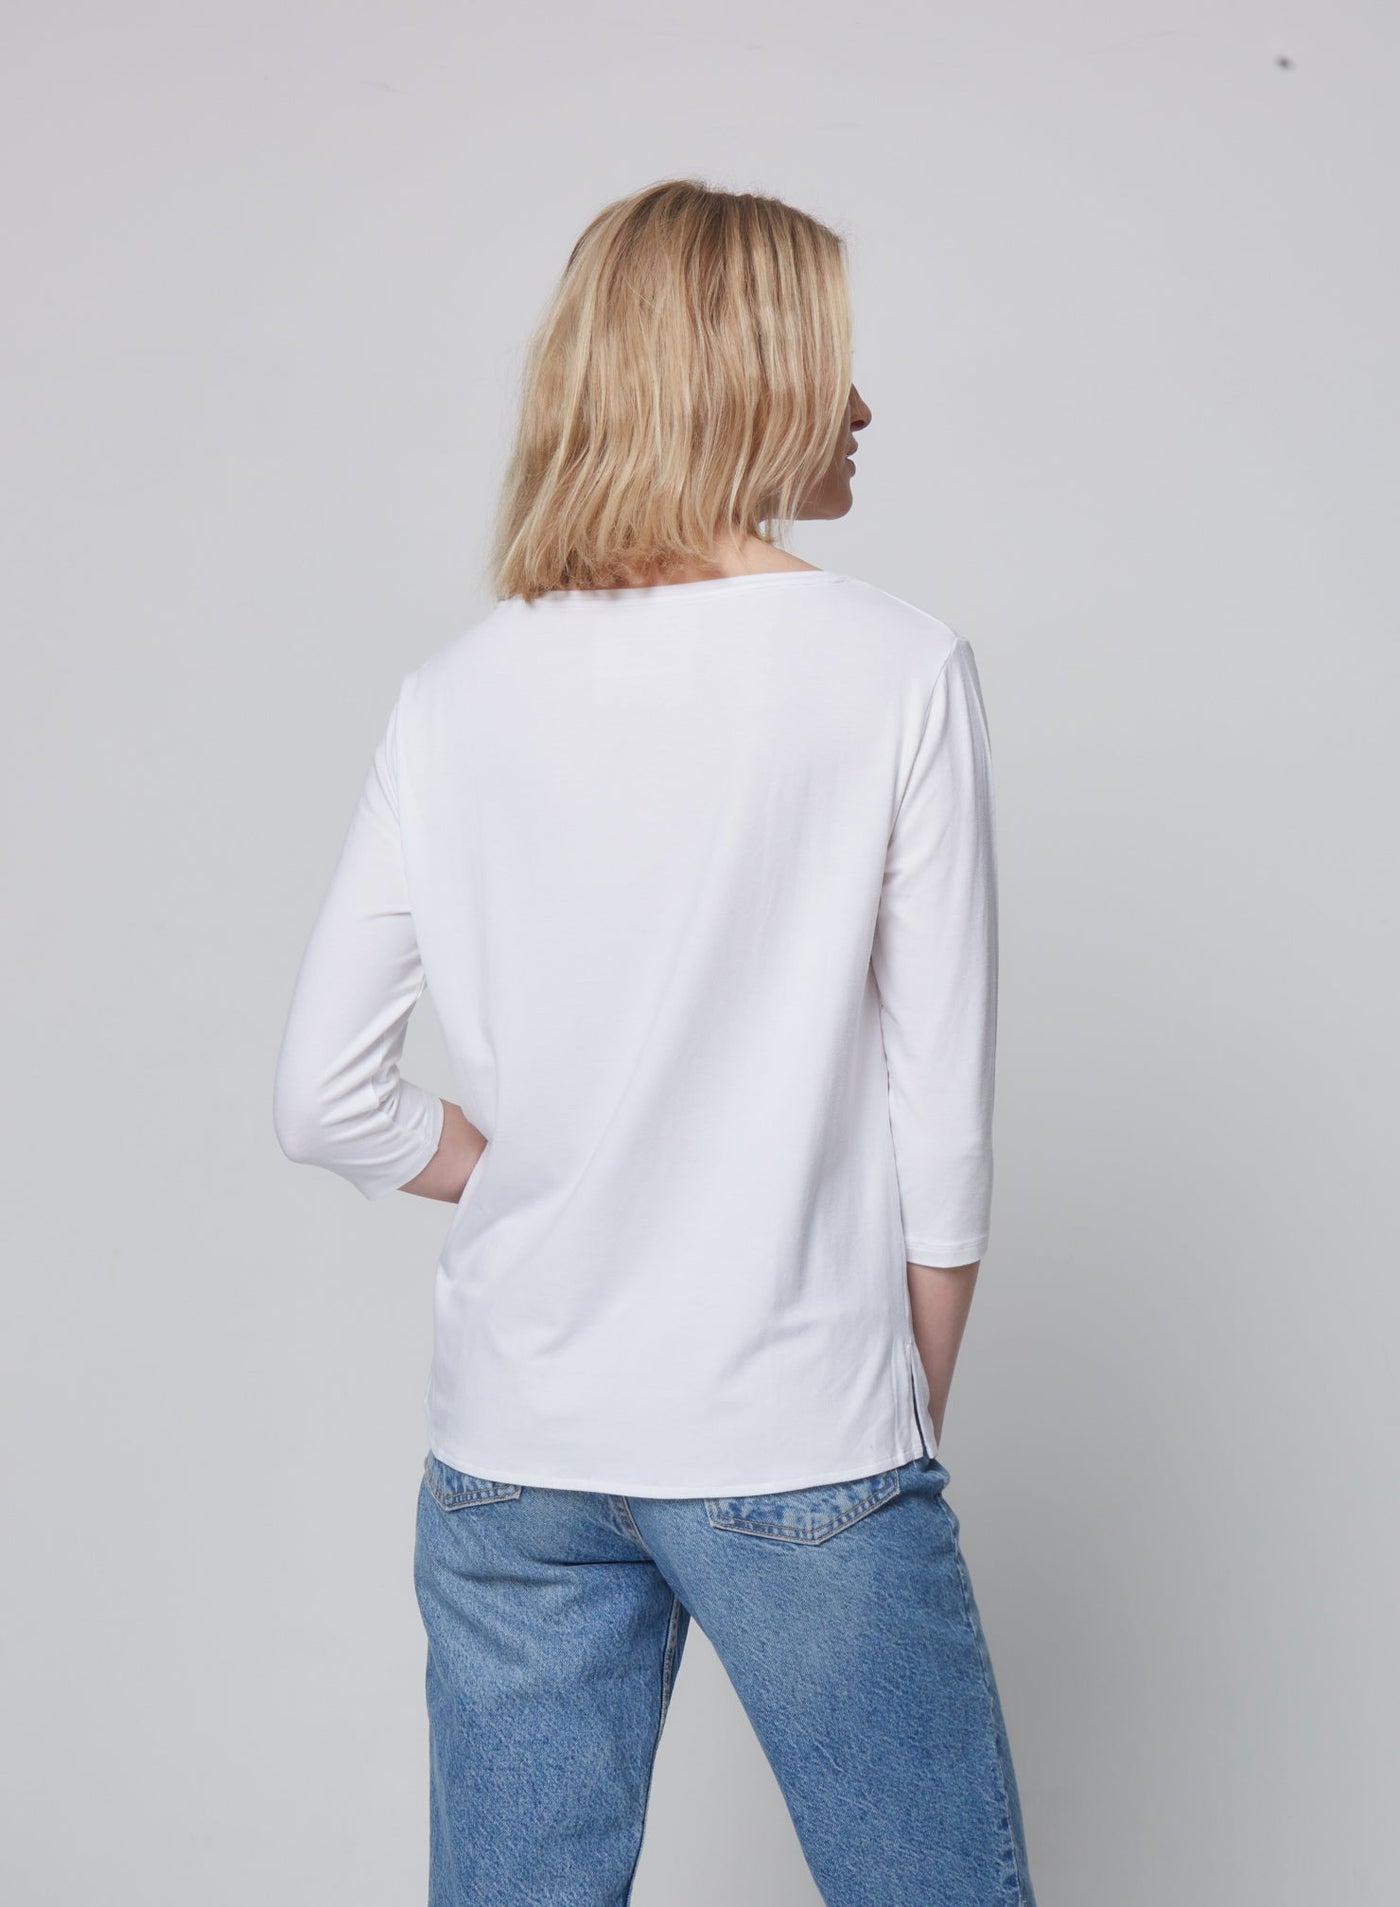 Soft Touch Relaxed 3/4 Sleeve Boatneck T-Shirt - BOATNECK 3/4 SLV - Majestic Filatures North America